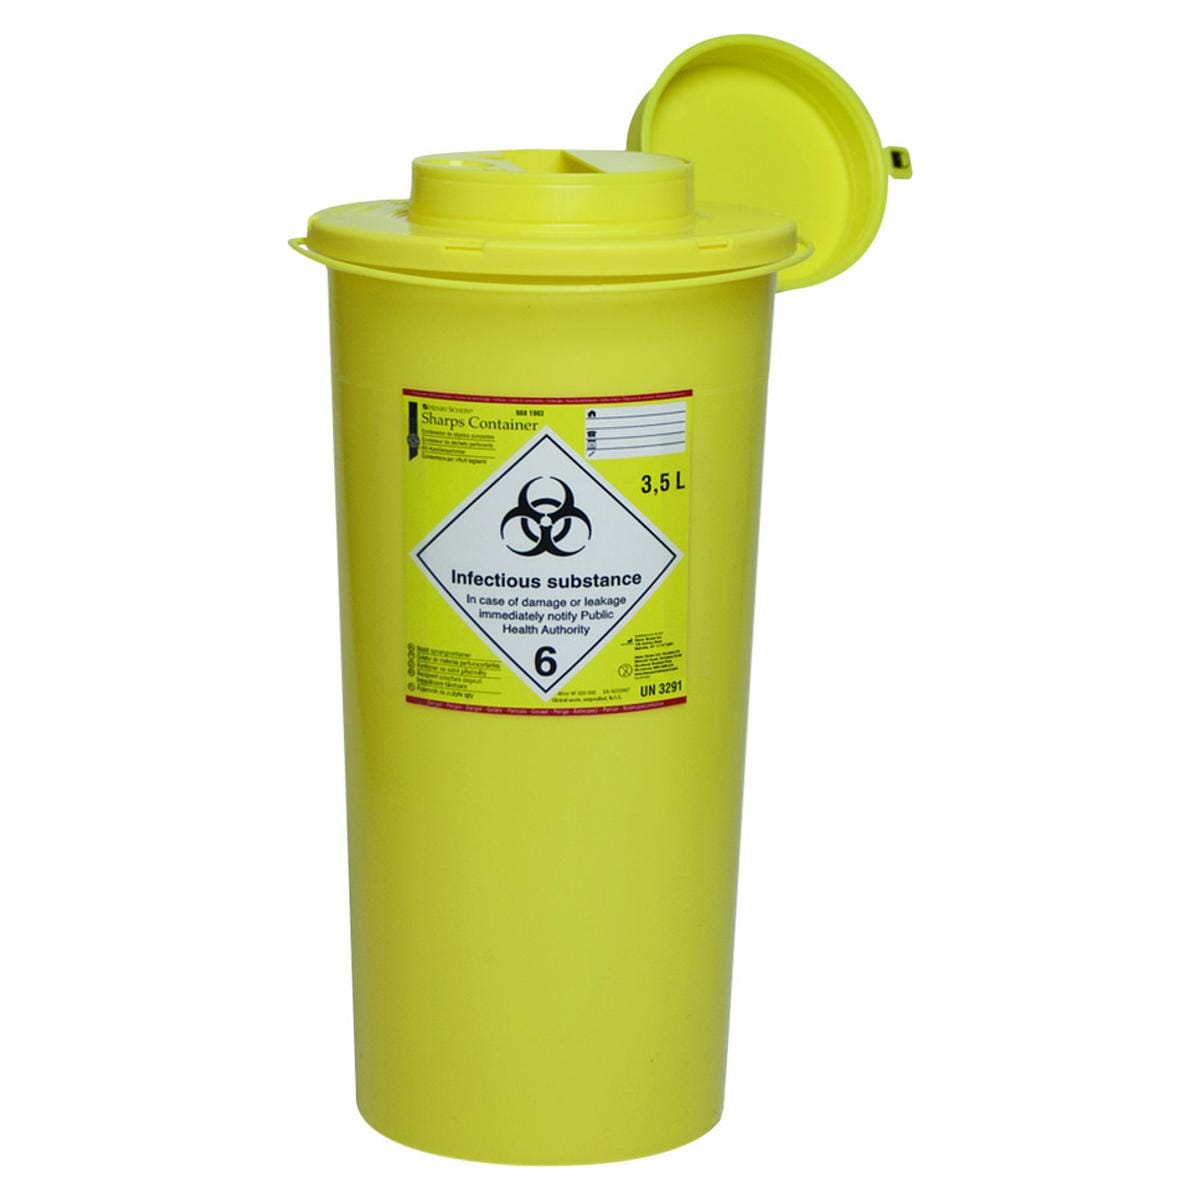 Sharps Container - 3,5 litres, rond,  14,5 x 31,4 cm